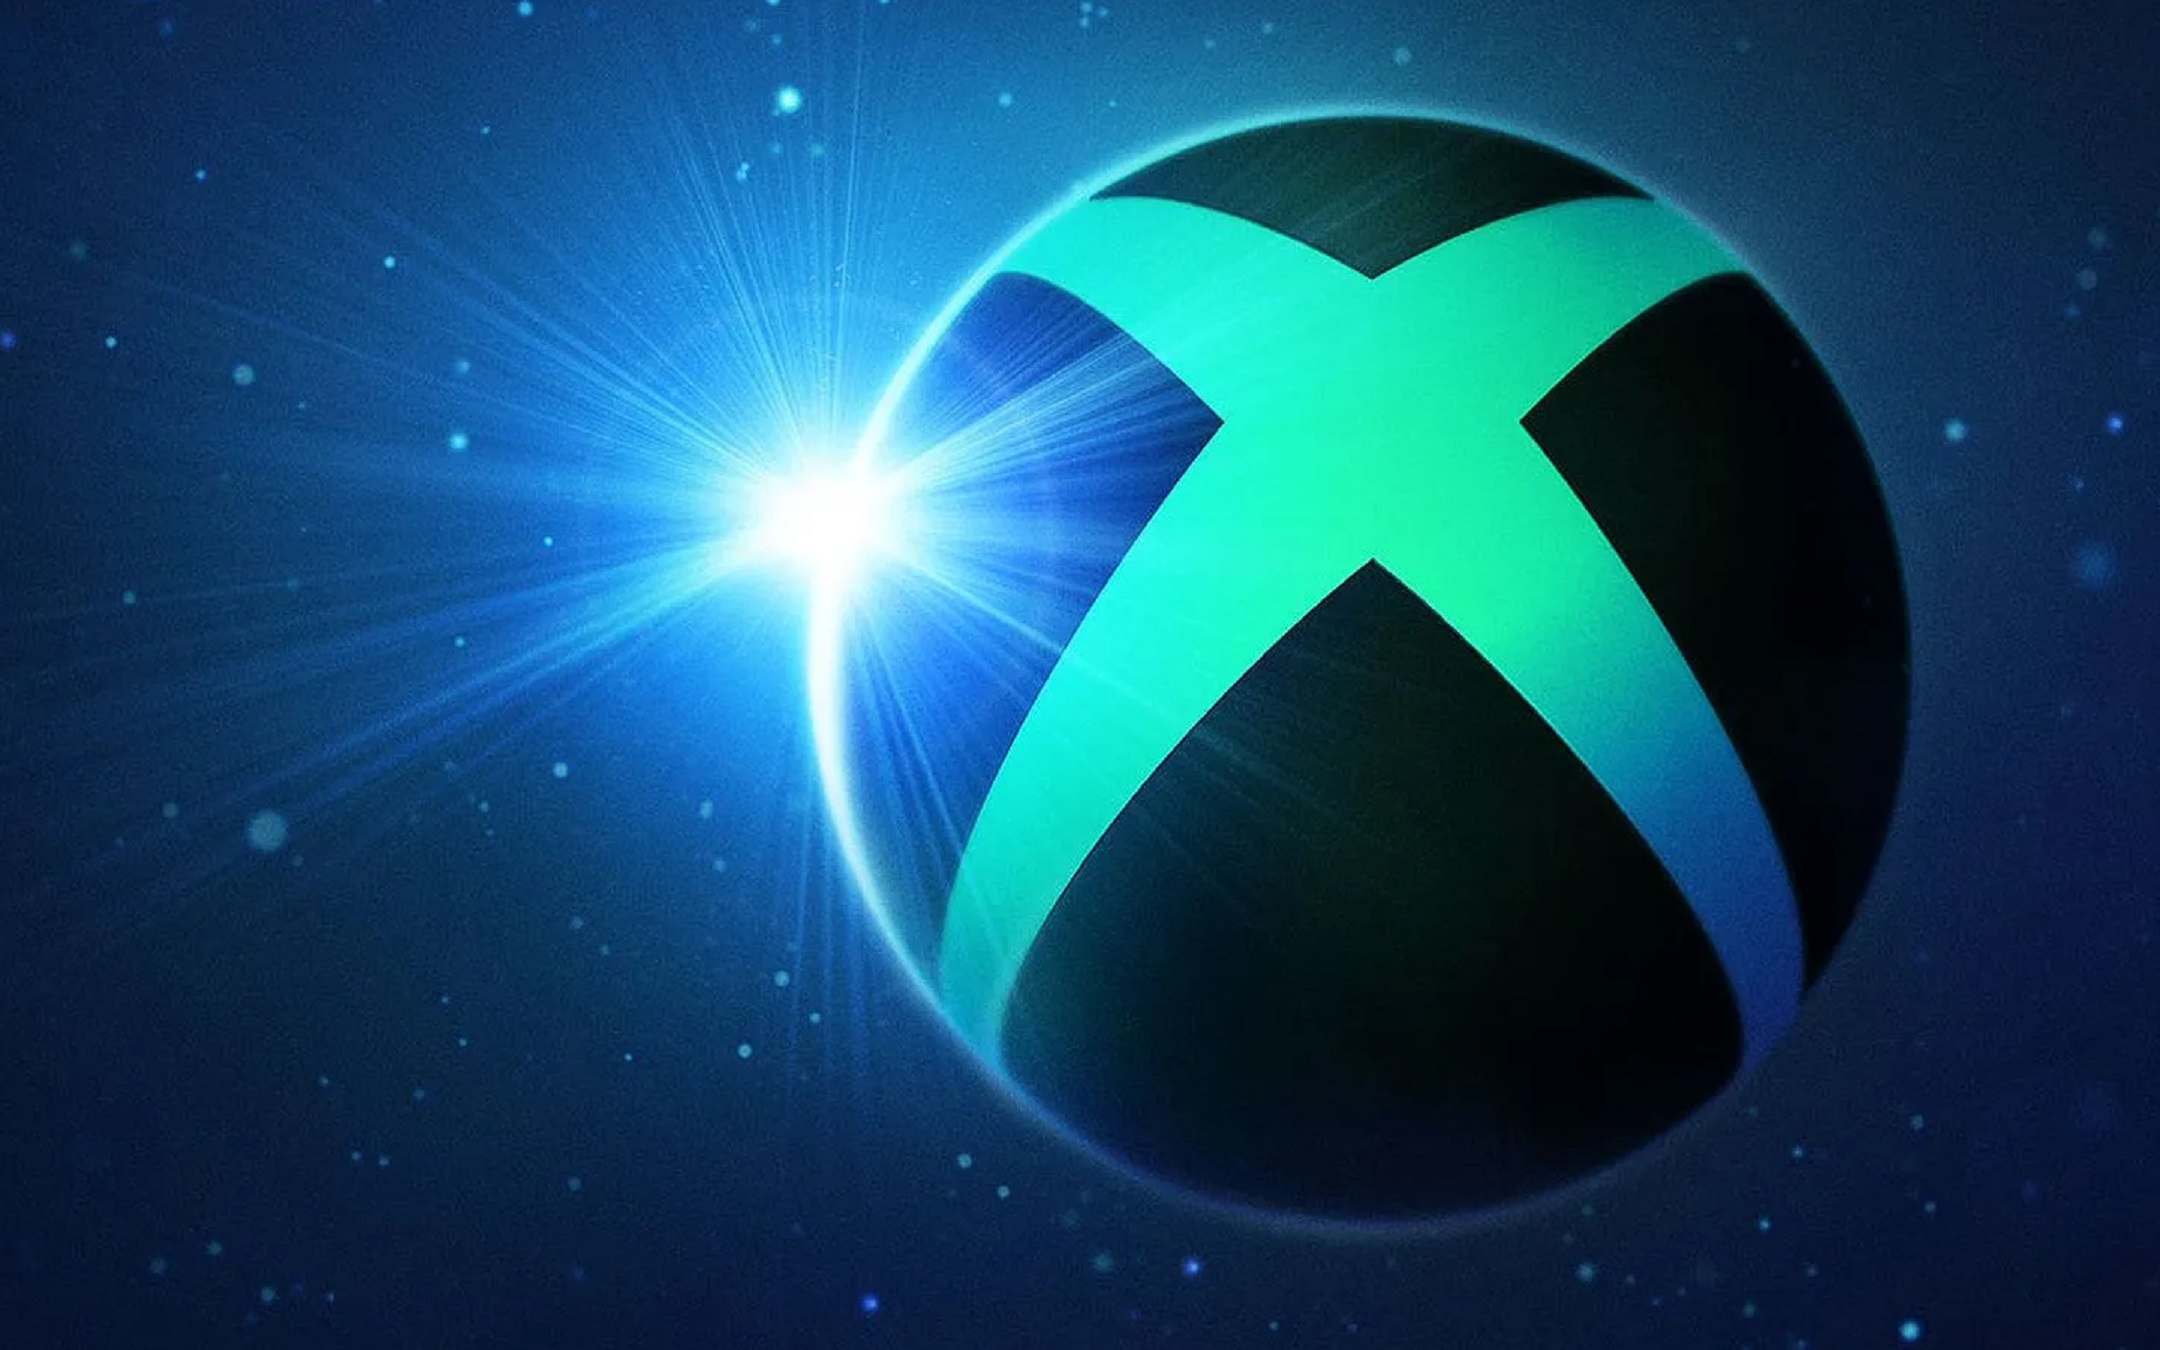 Klobrille on X: My personal Xbox Game Studios prediction for E3